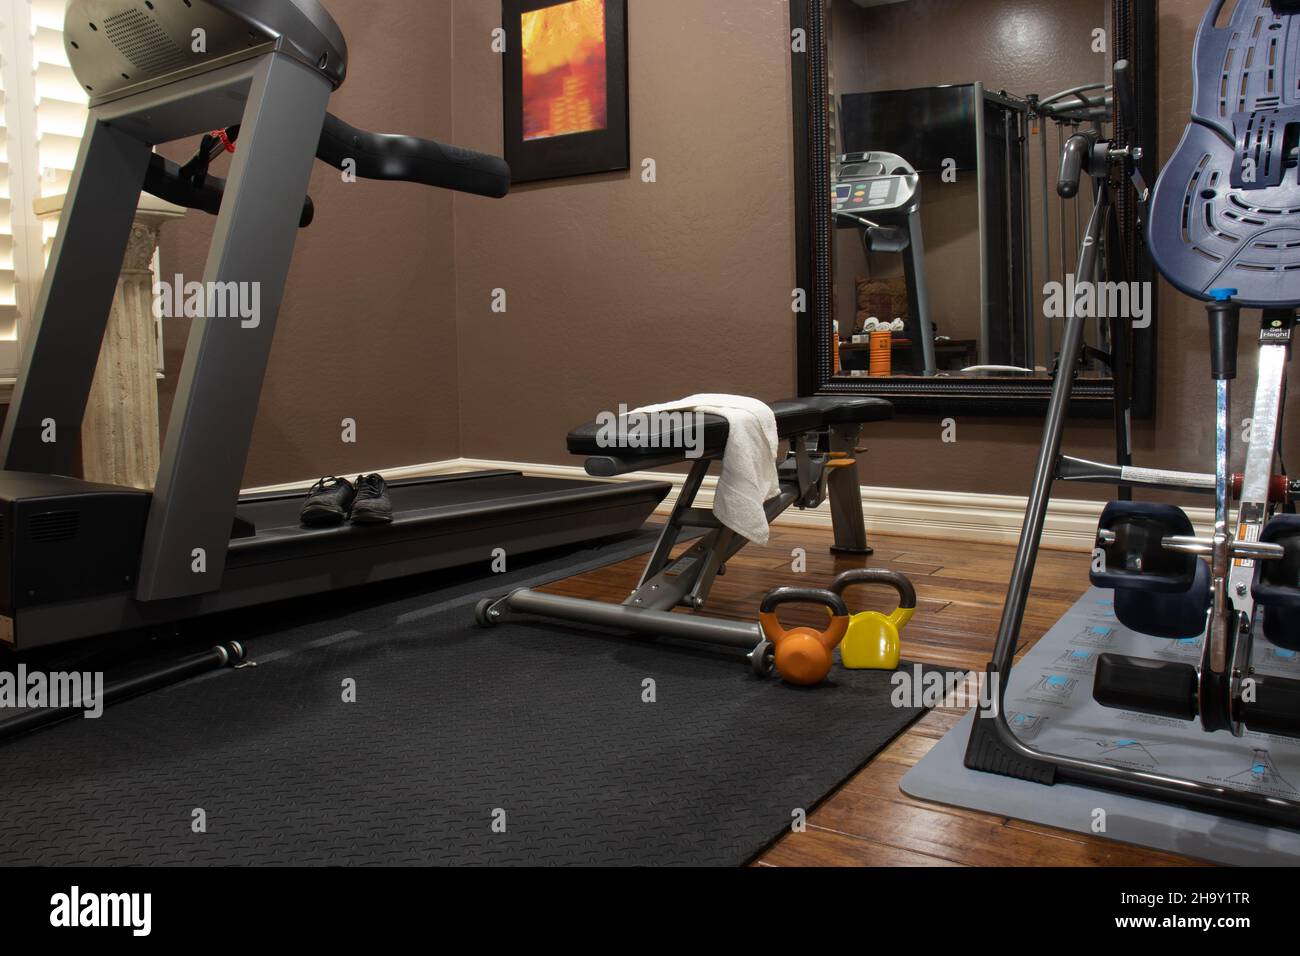 Home gym in spare bedroom with a treadmill, bench, and weights Stock Photo